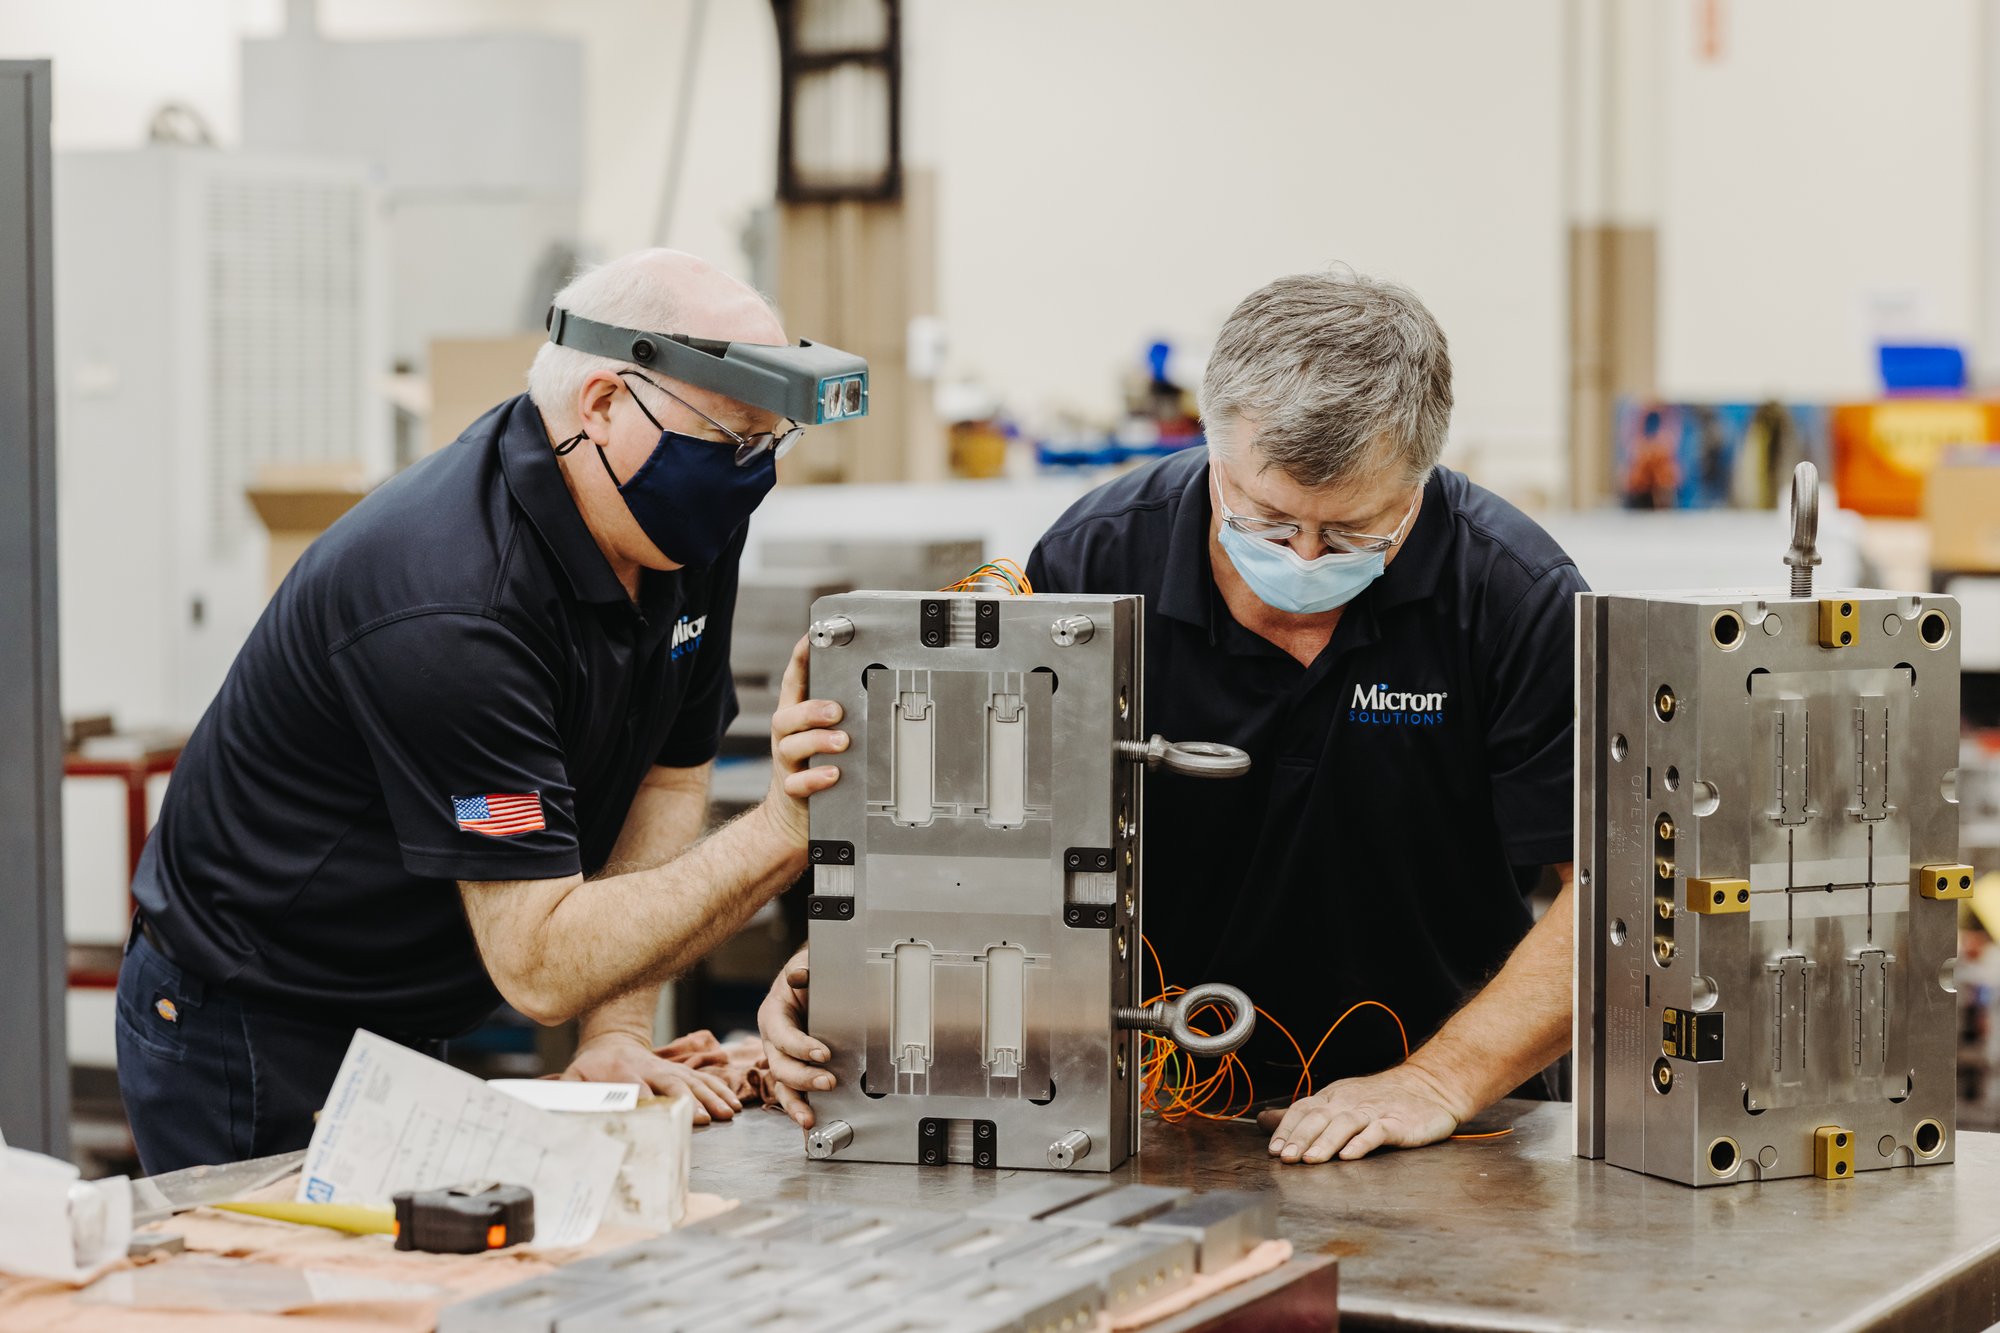 Two Micron employees working together to ensure precision, quality, and accuracy